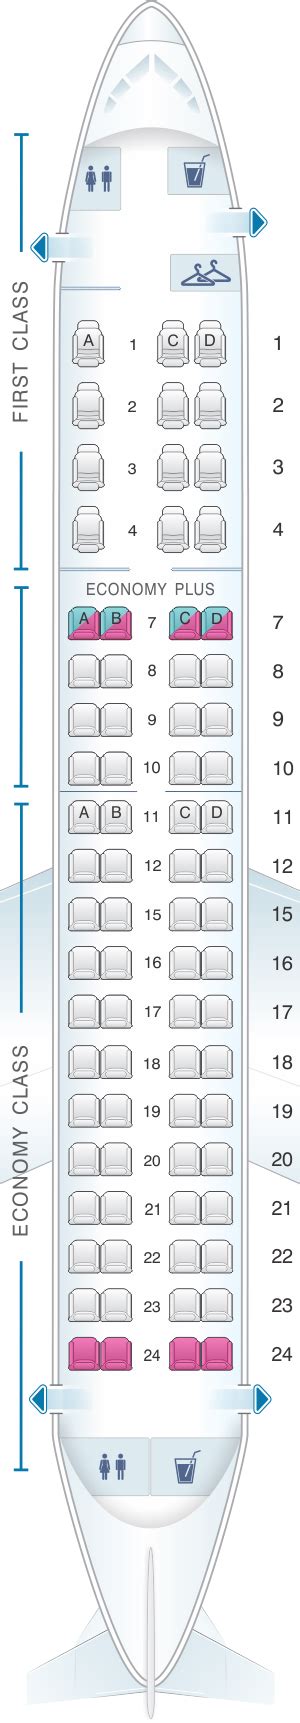 embraer 175 seating chart united airlines